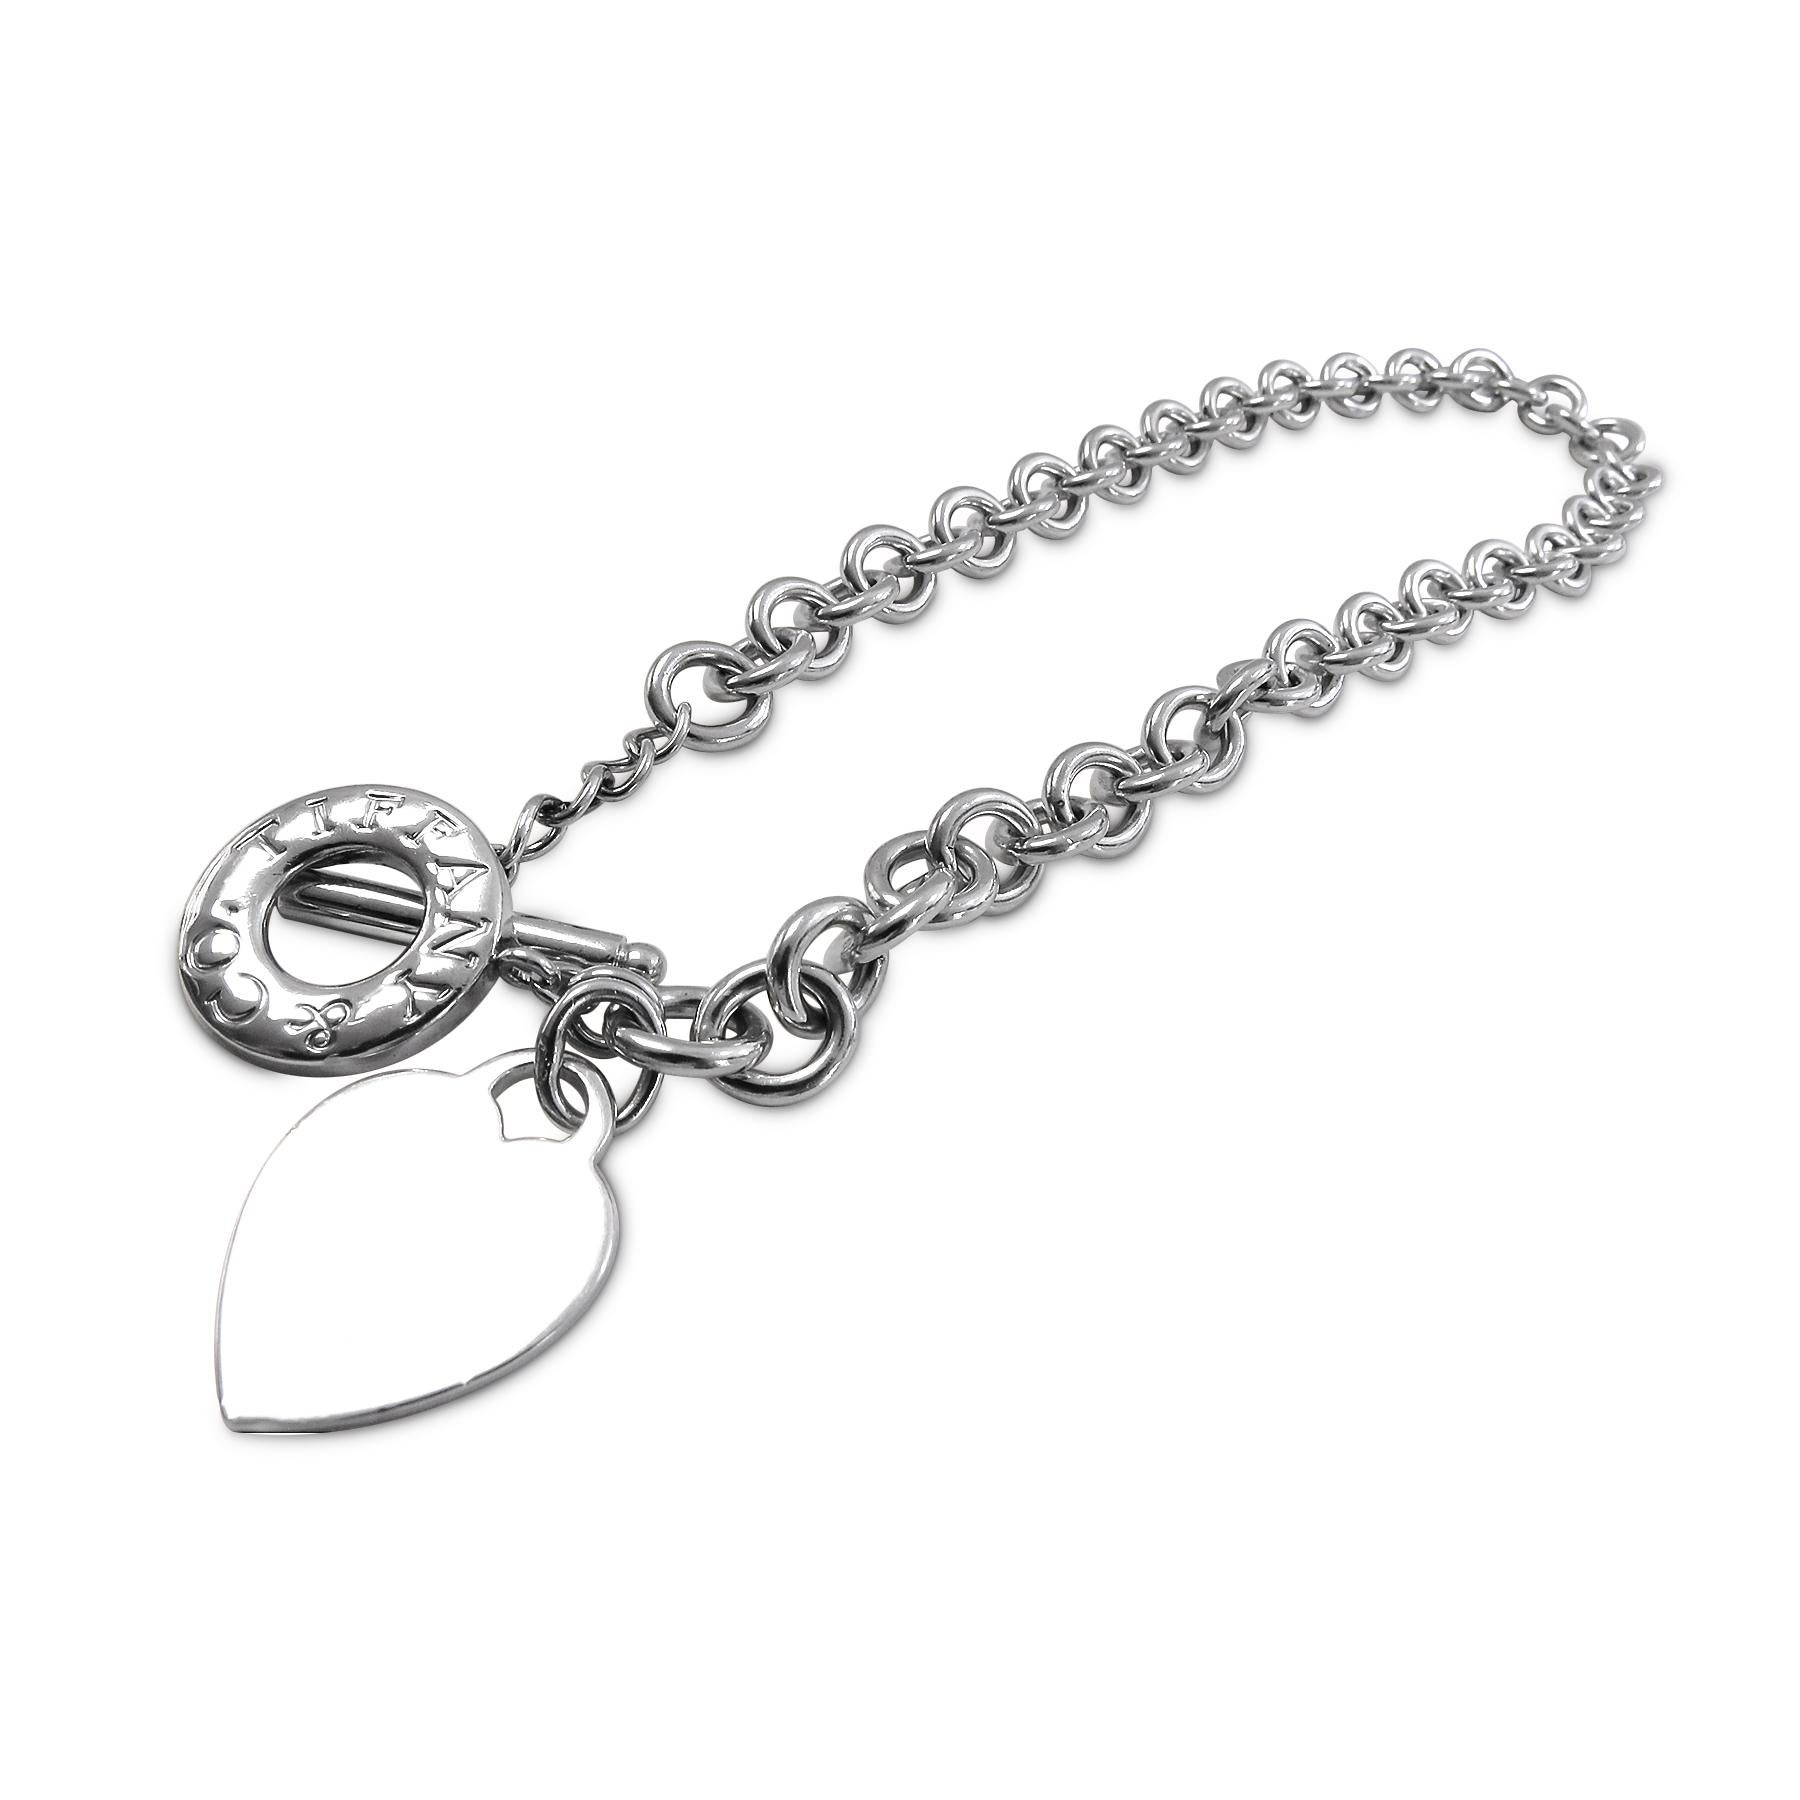 This classic Tiffany and co necklace will steal your heart with its design. Crafted in Sterling silver, its design showcases a glorious link heart tag necklace Choker with a toggle clasp. It is 15 inches long, weighs 74.6 grams and the link is 2mm